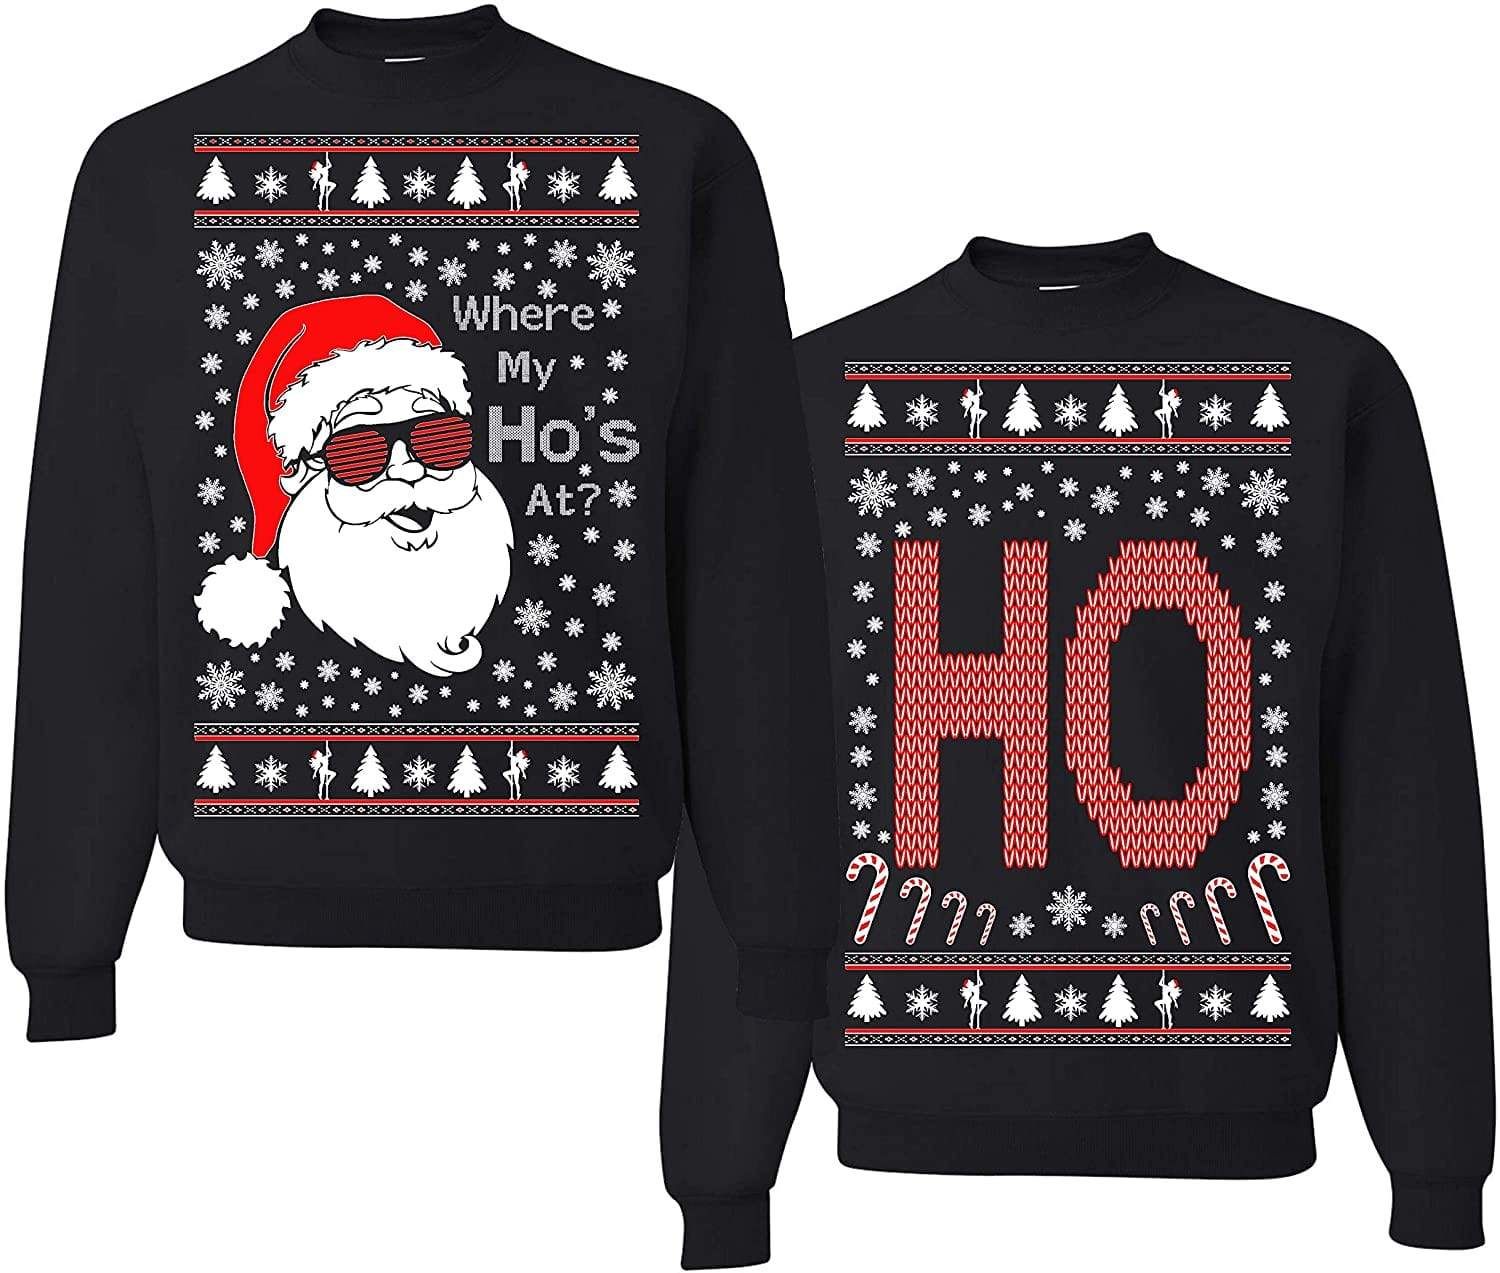 Where My Ho'S At? Christmas Couples Sweaters, Funny Ugly Christmas Matching Sweatshirt